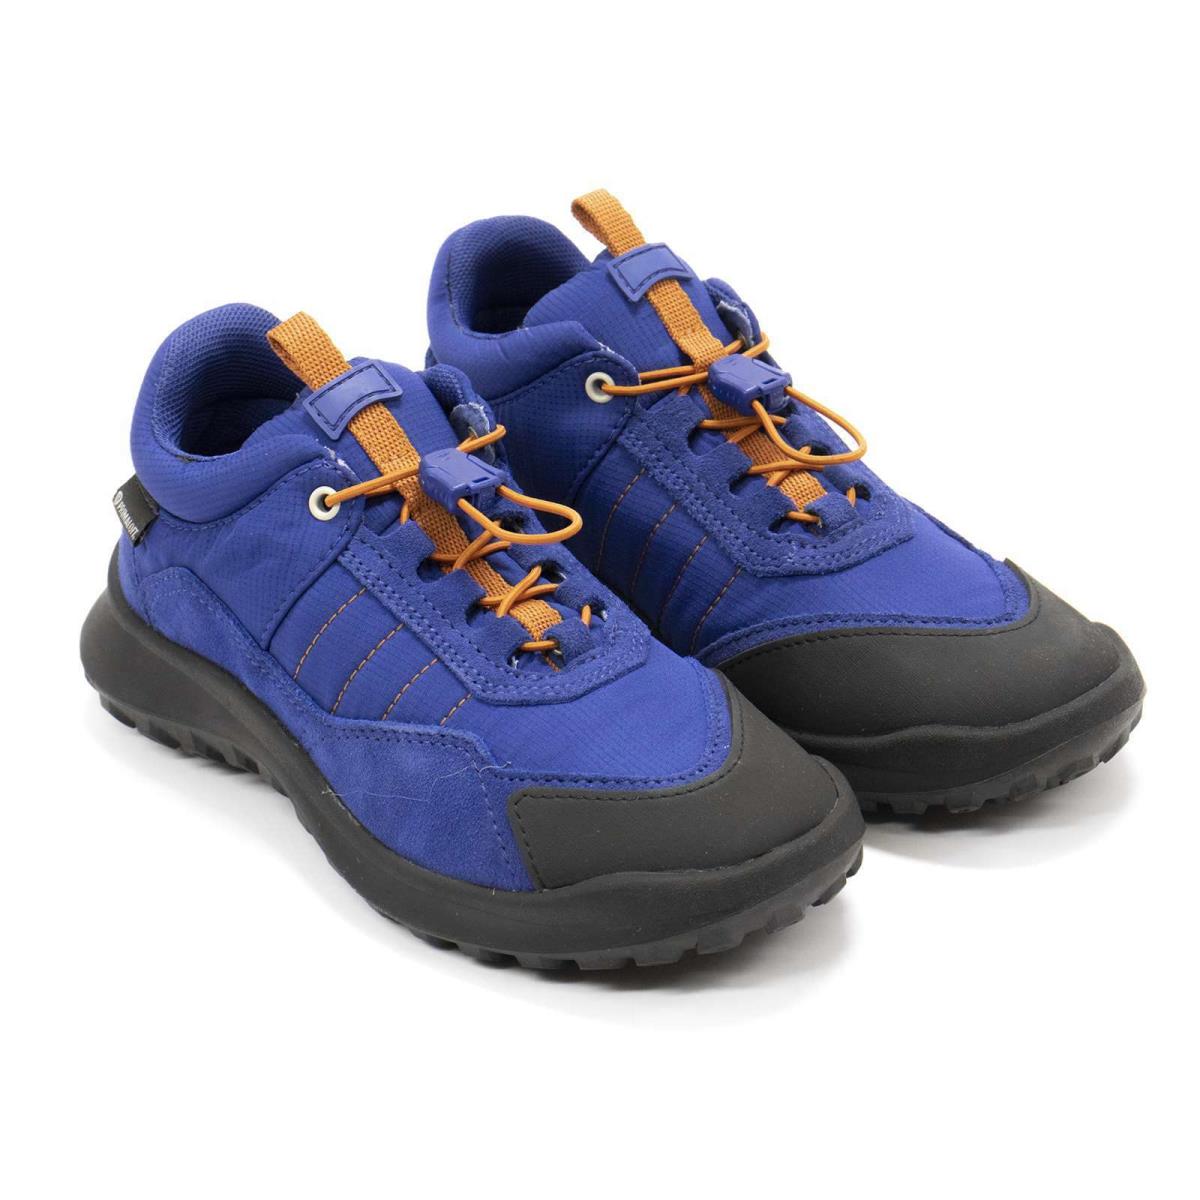 Kids Camper Crclr Mid-top Insulated Water-resistant Sneakers Blue Boots